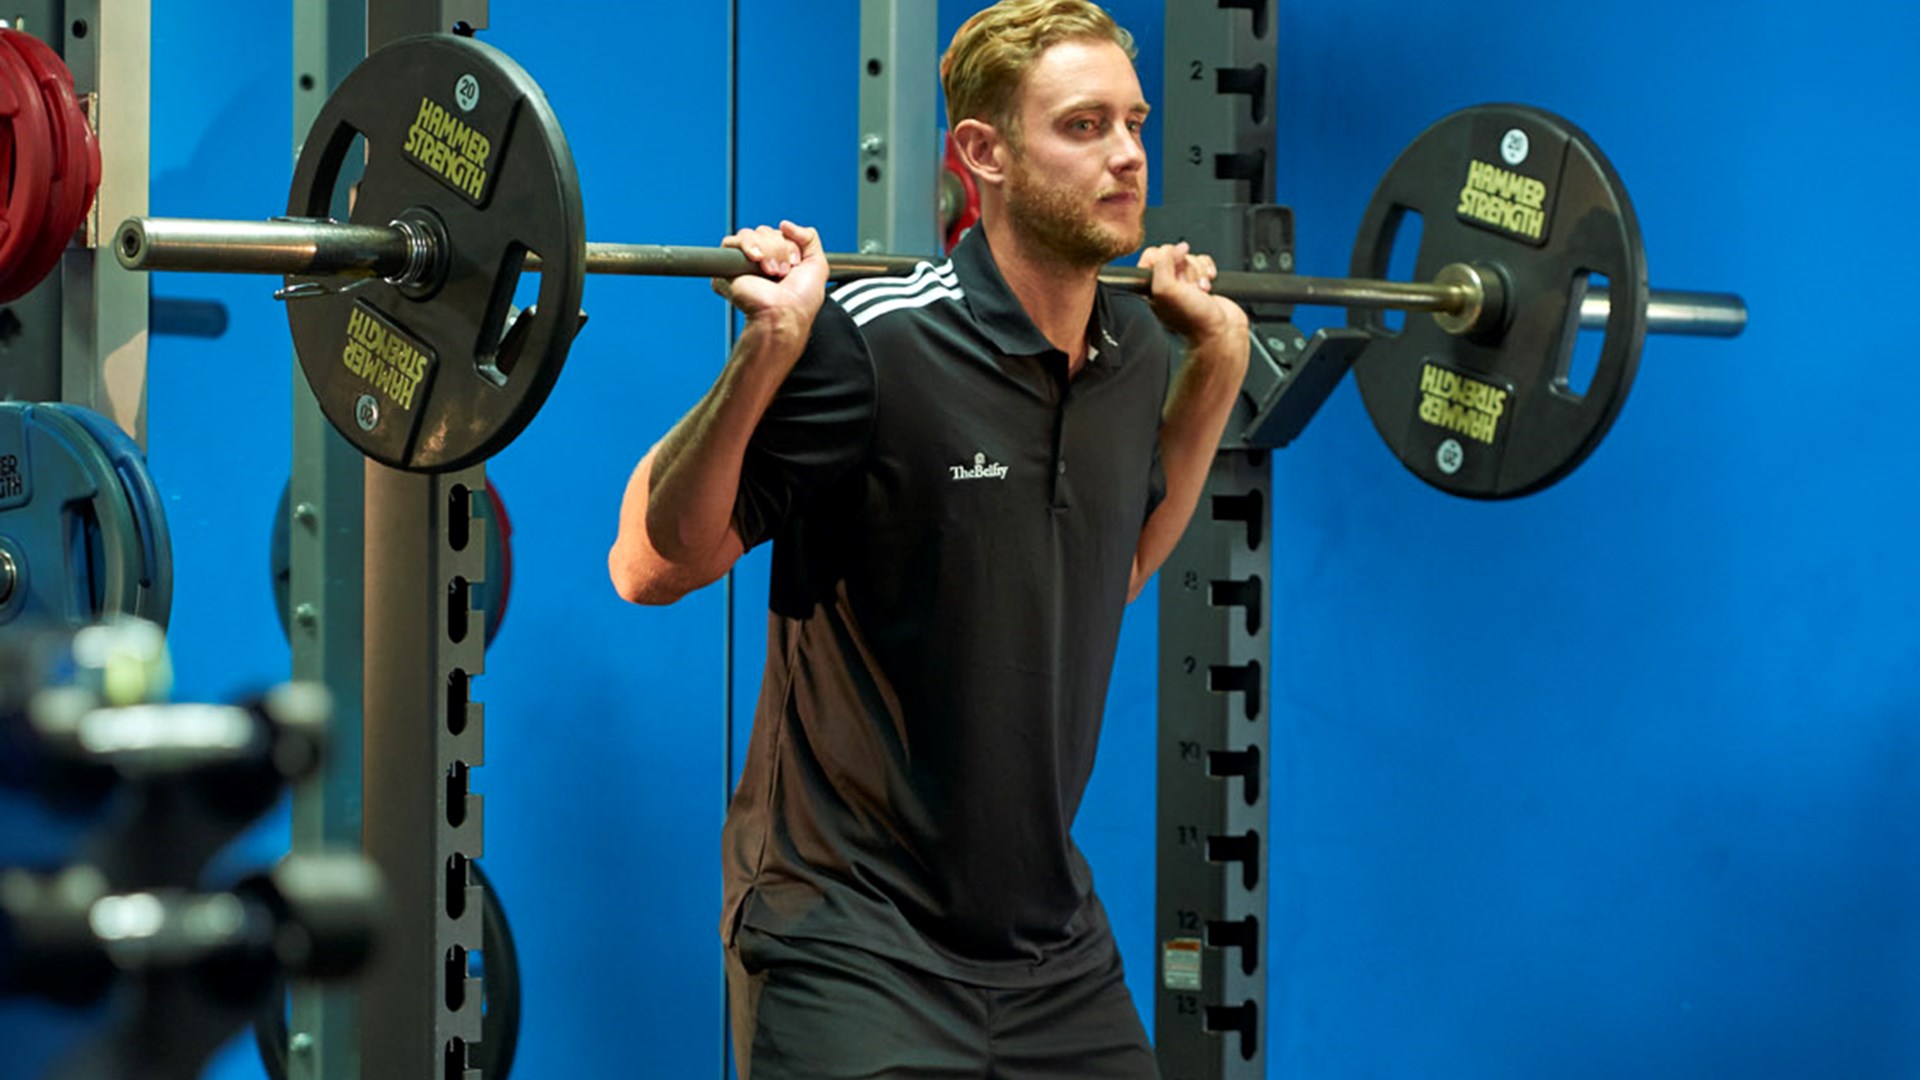 Weightlifting at the Belfry Leisure Club